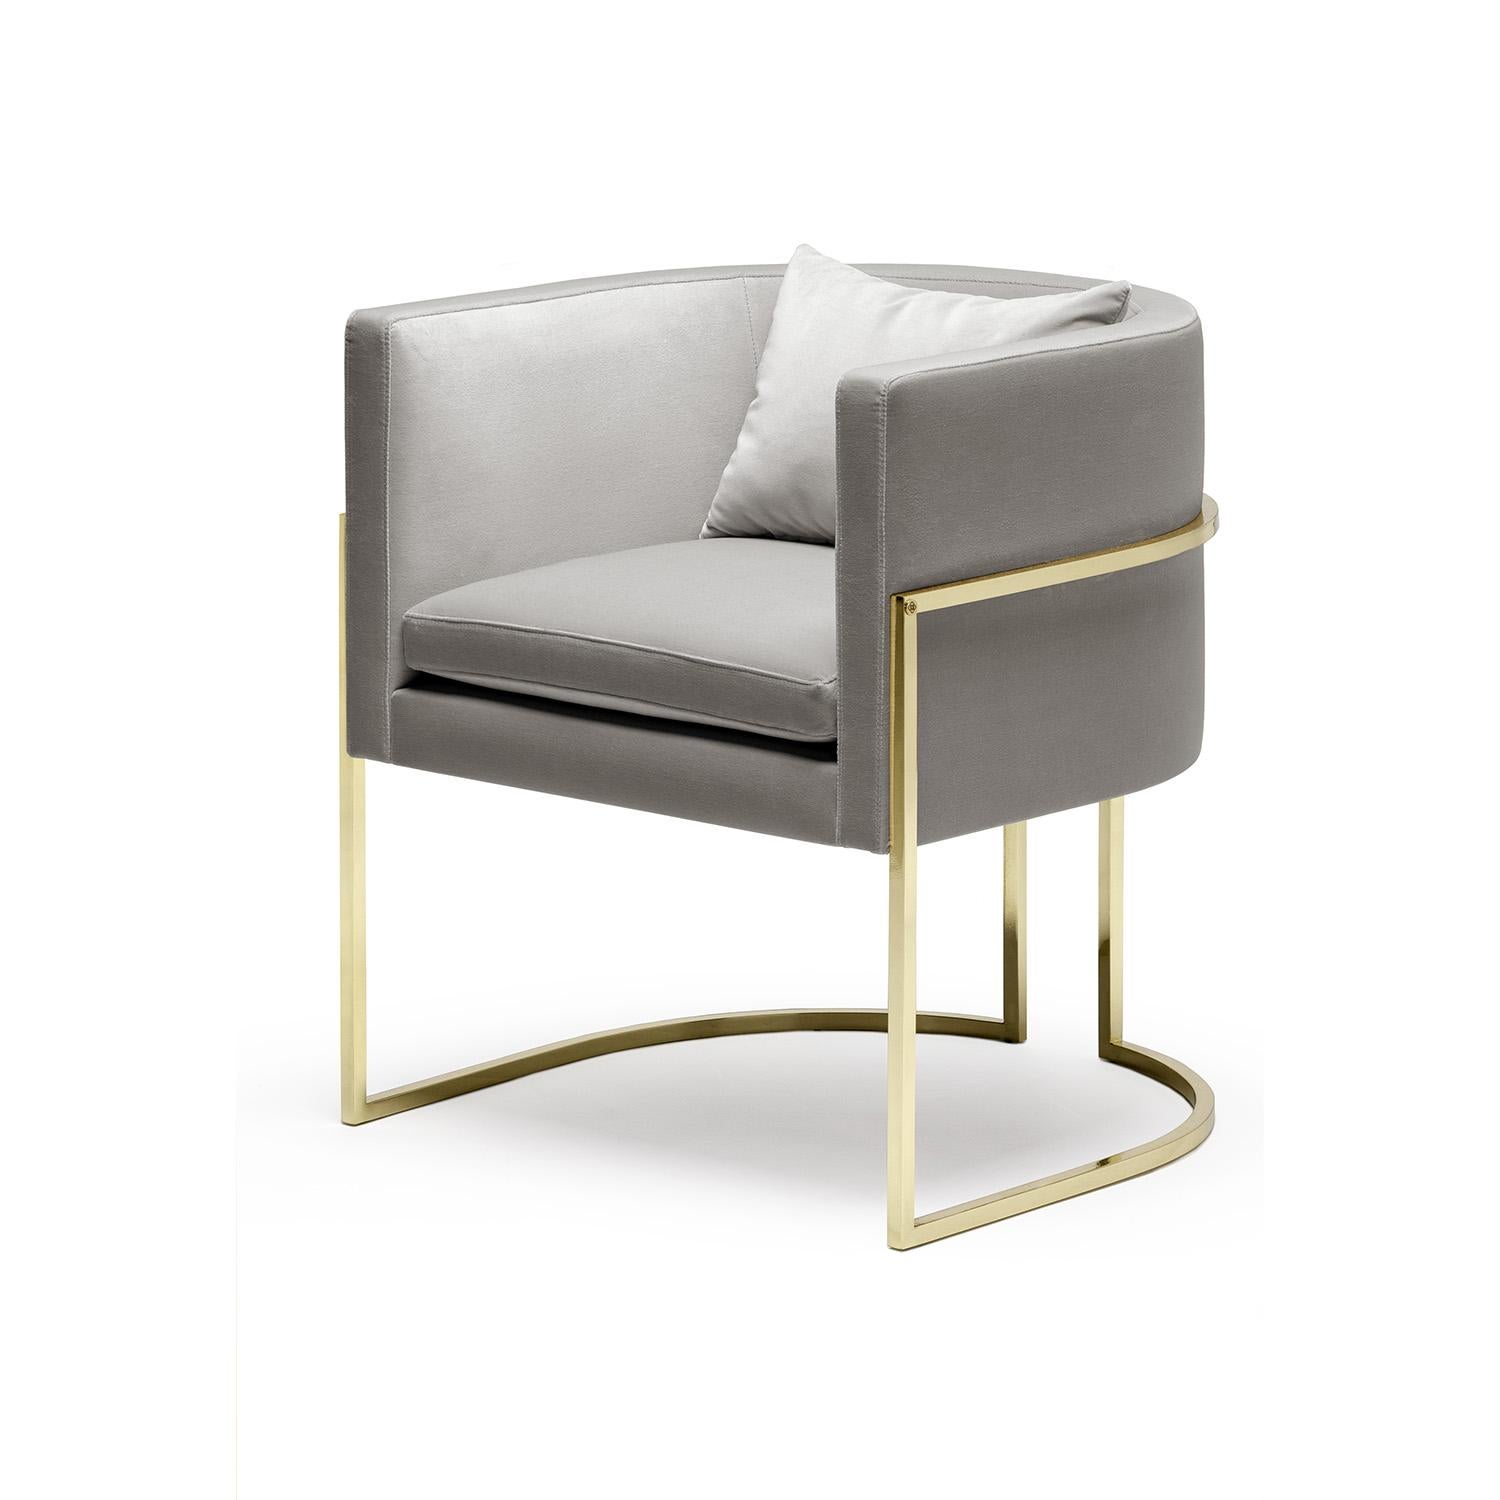 Brass Julius Chair by Duistt
Dimensions: W 62 x D 62 x H 71 cm
Materials: Duistt Fabric and Brass

The JULIUS chair, crafted with great attention to detail, features clean and modern lines always with a strong craftsmanship presence like the brass